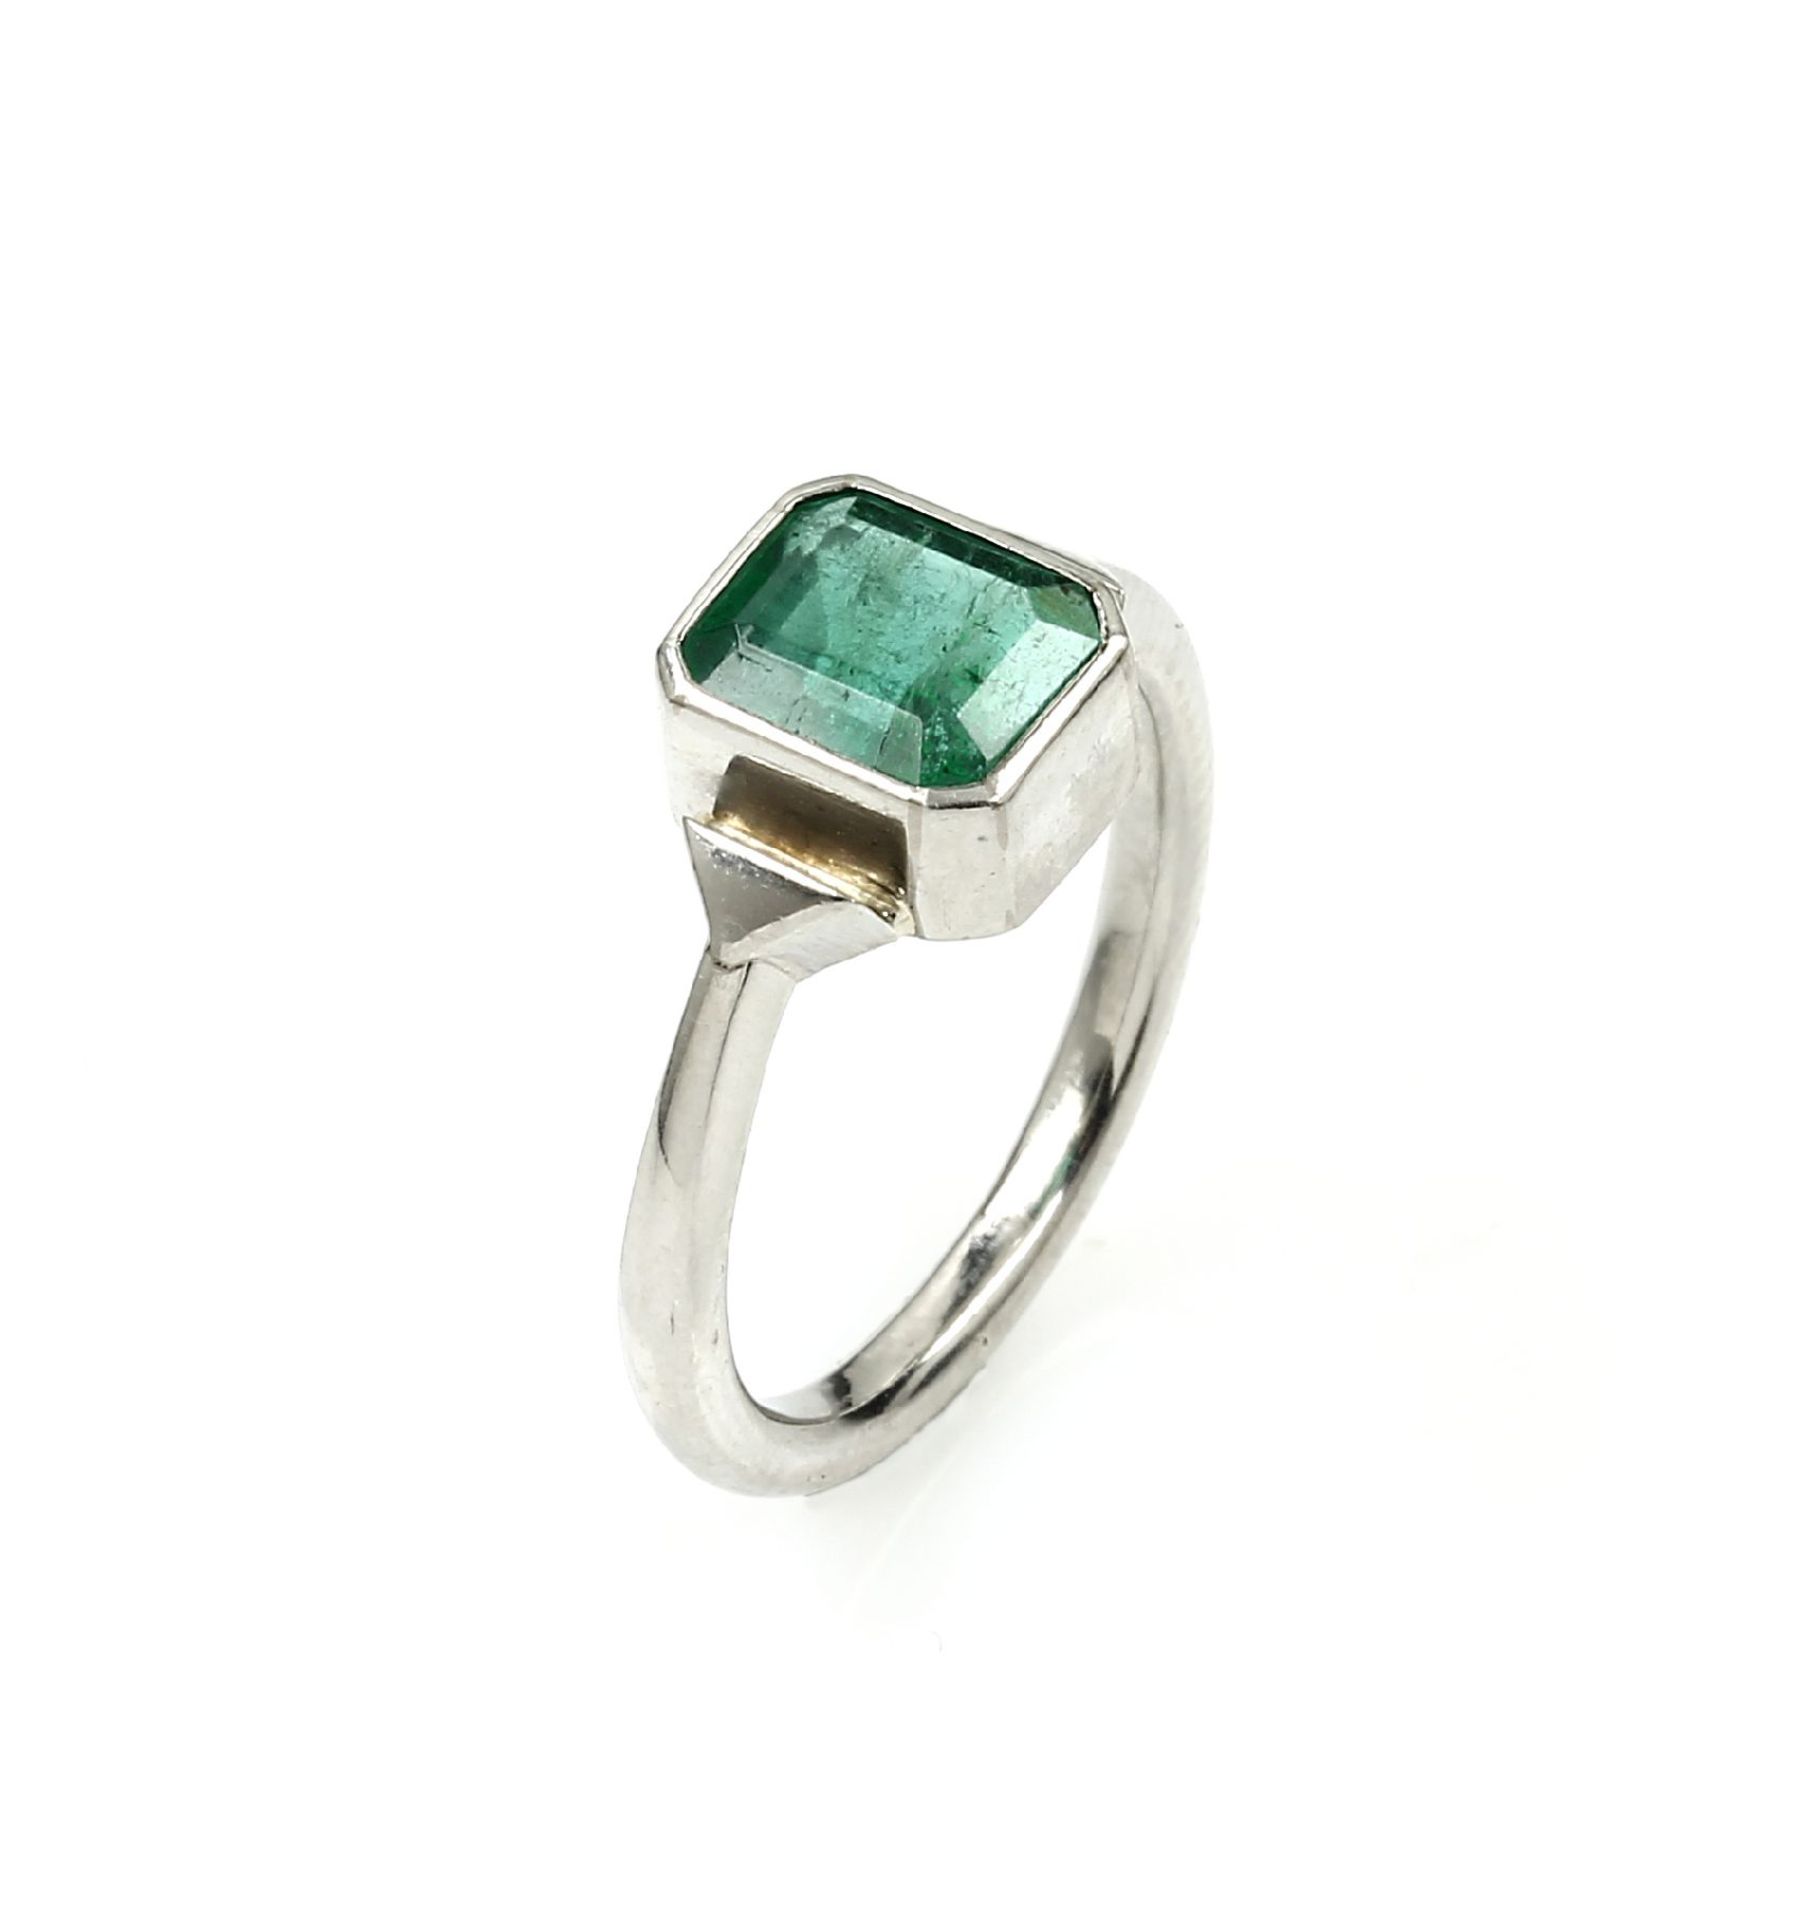 Ring with emerald , platinum, emerald cut emerald approx. 1.50 ct, ringsize 56, total approx. 6.8 - Bild 2 aus 2